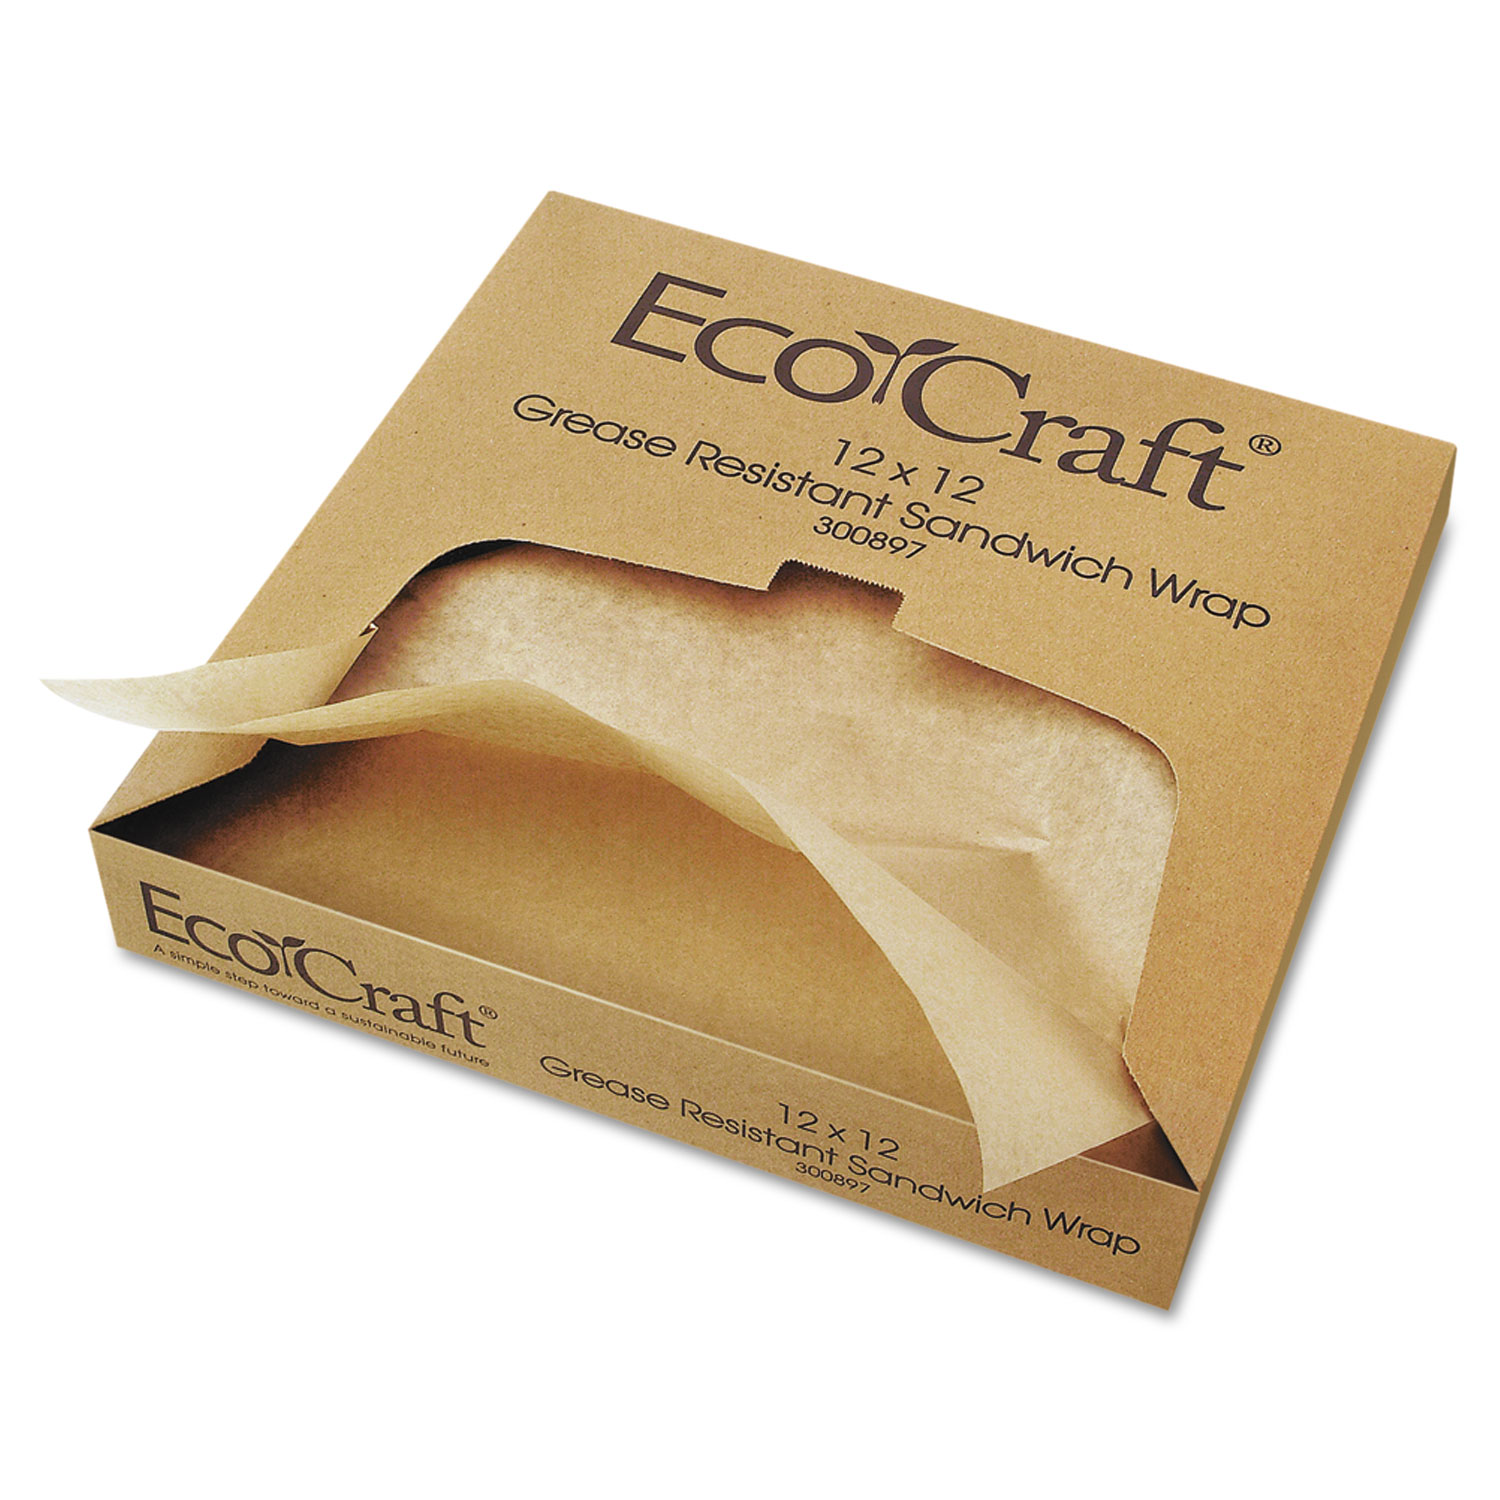  Bagcraft BGC 300897 EcoCraft Grease-Resistant Paper Wraps and Liners, Natural, 12 x 12, 1000/Box, 5 Boxes/Carton (BGC300897) 